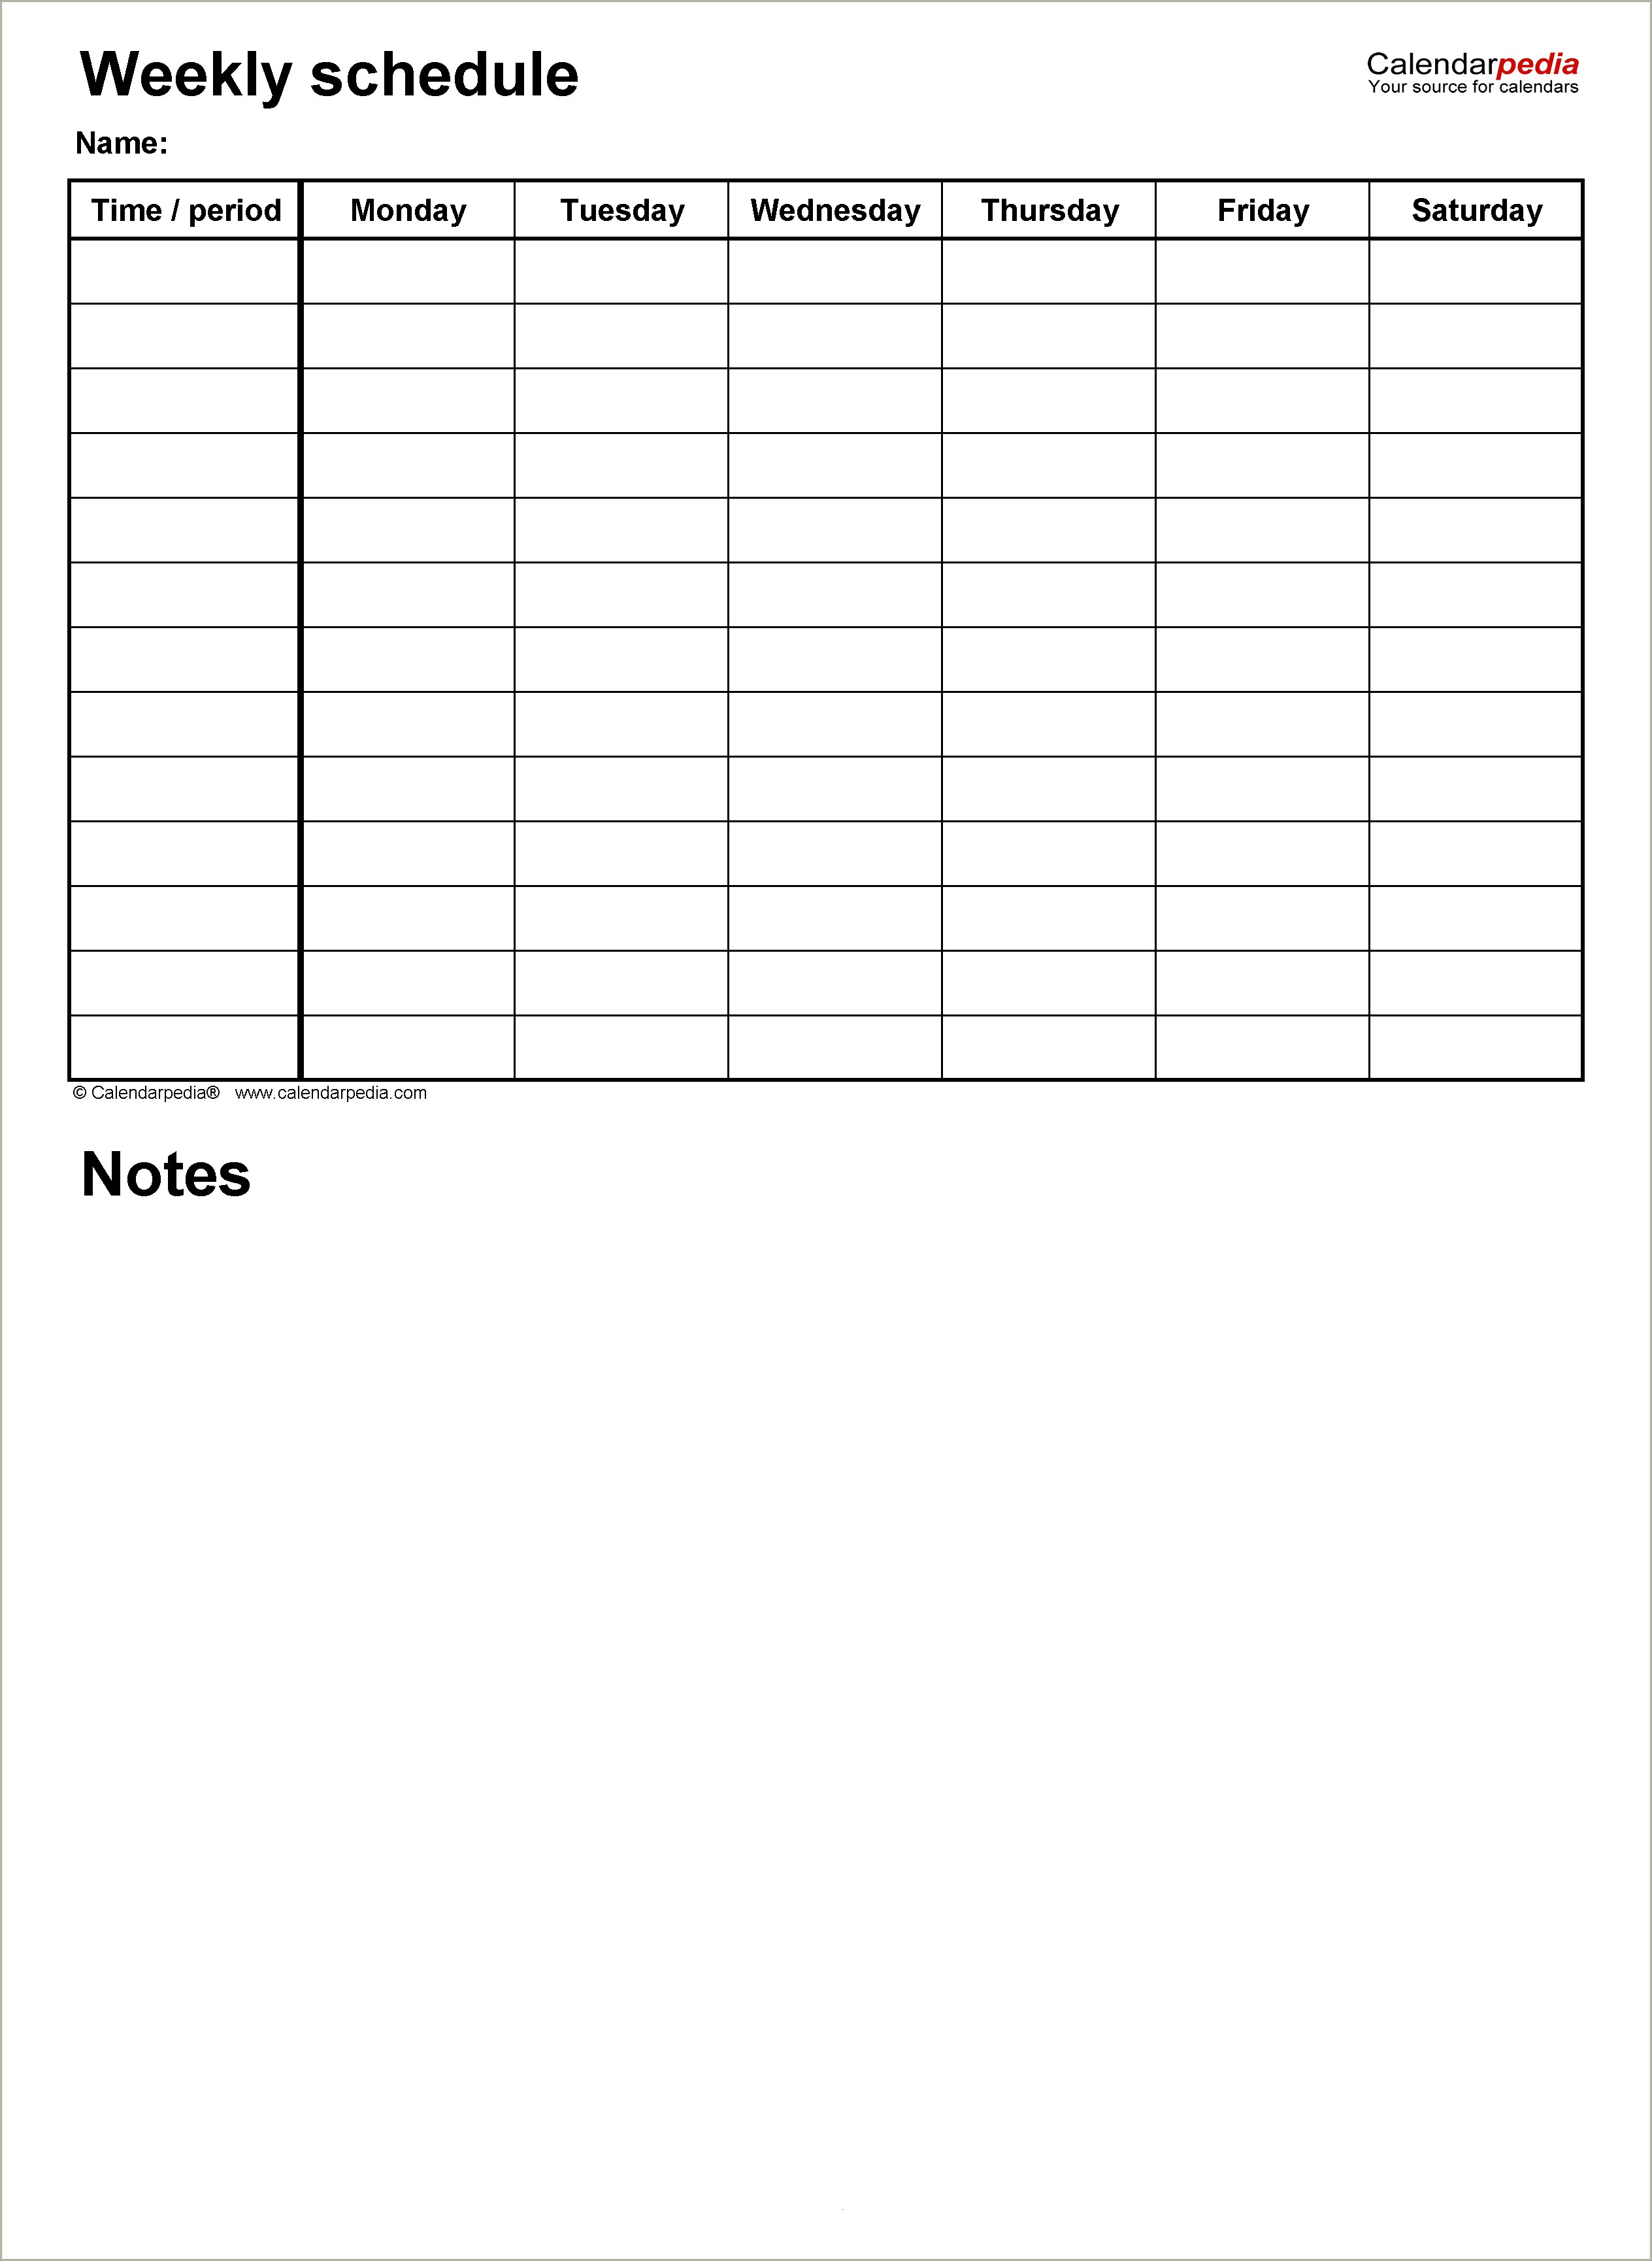 Meeting Room Booking Template Excel Free Download